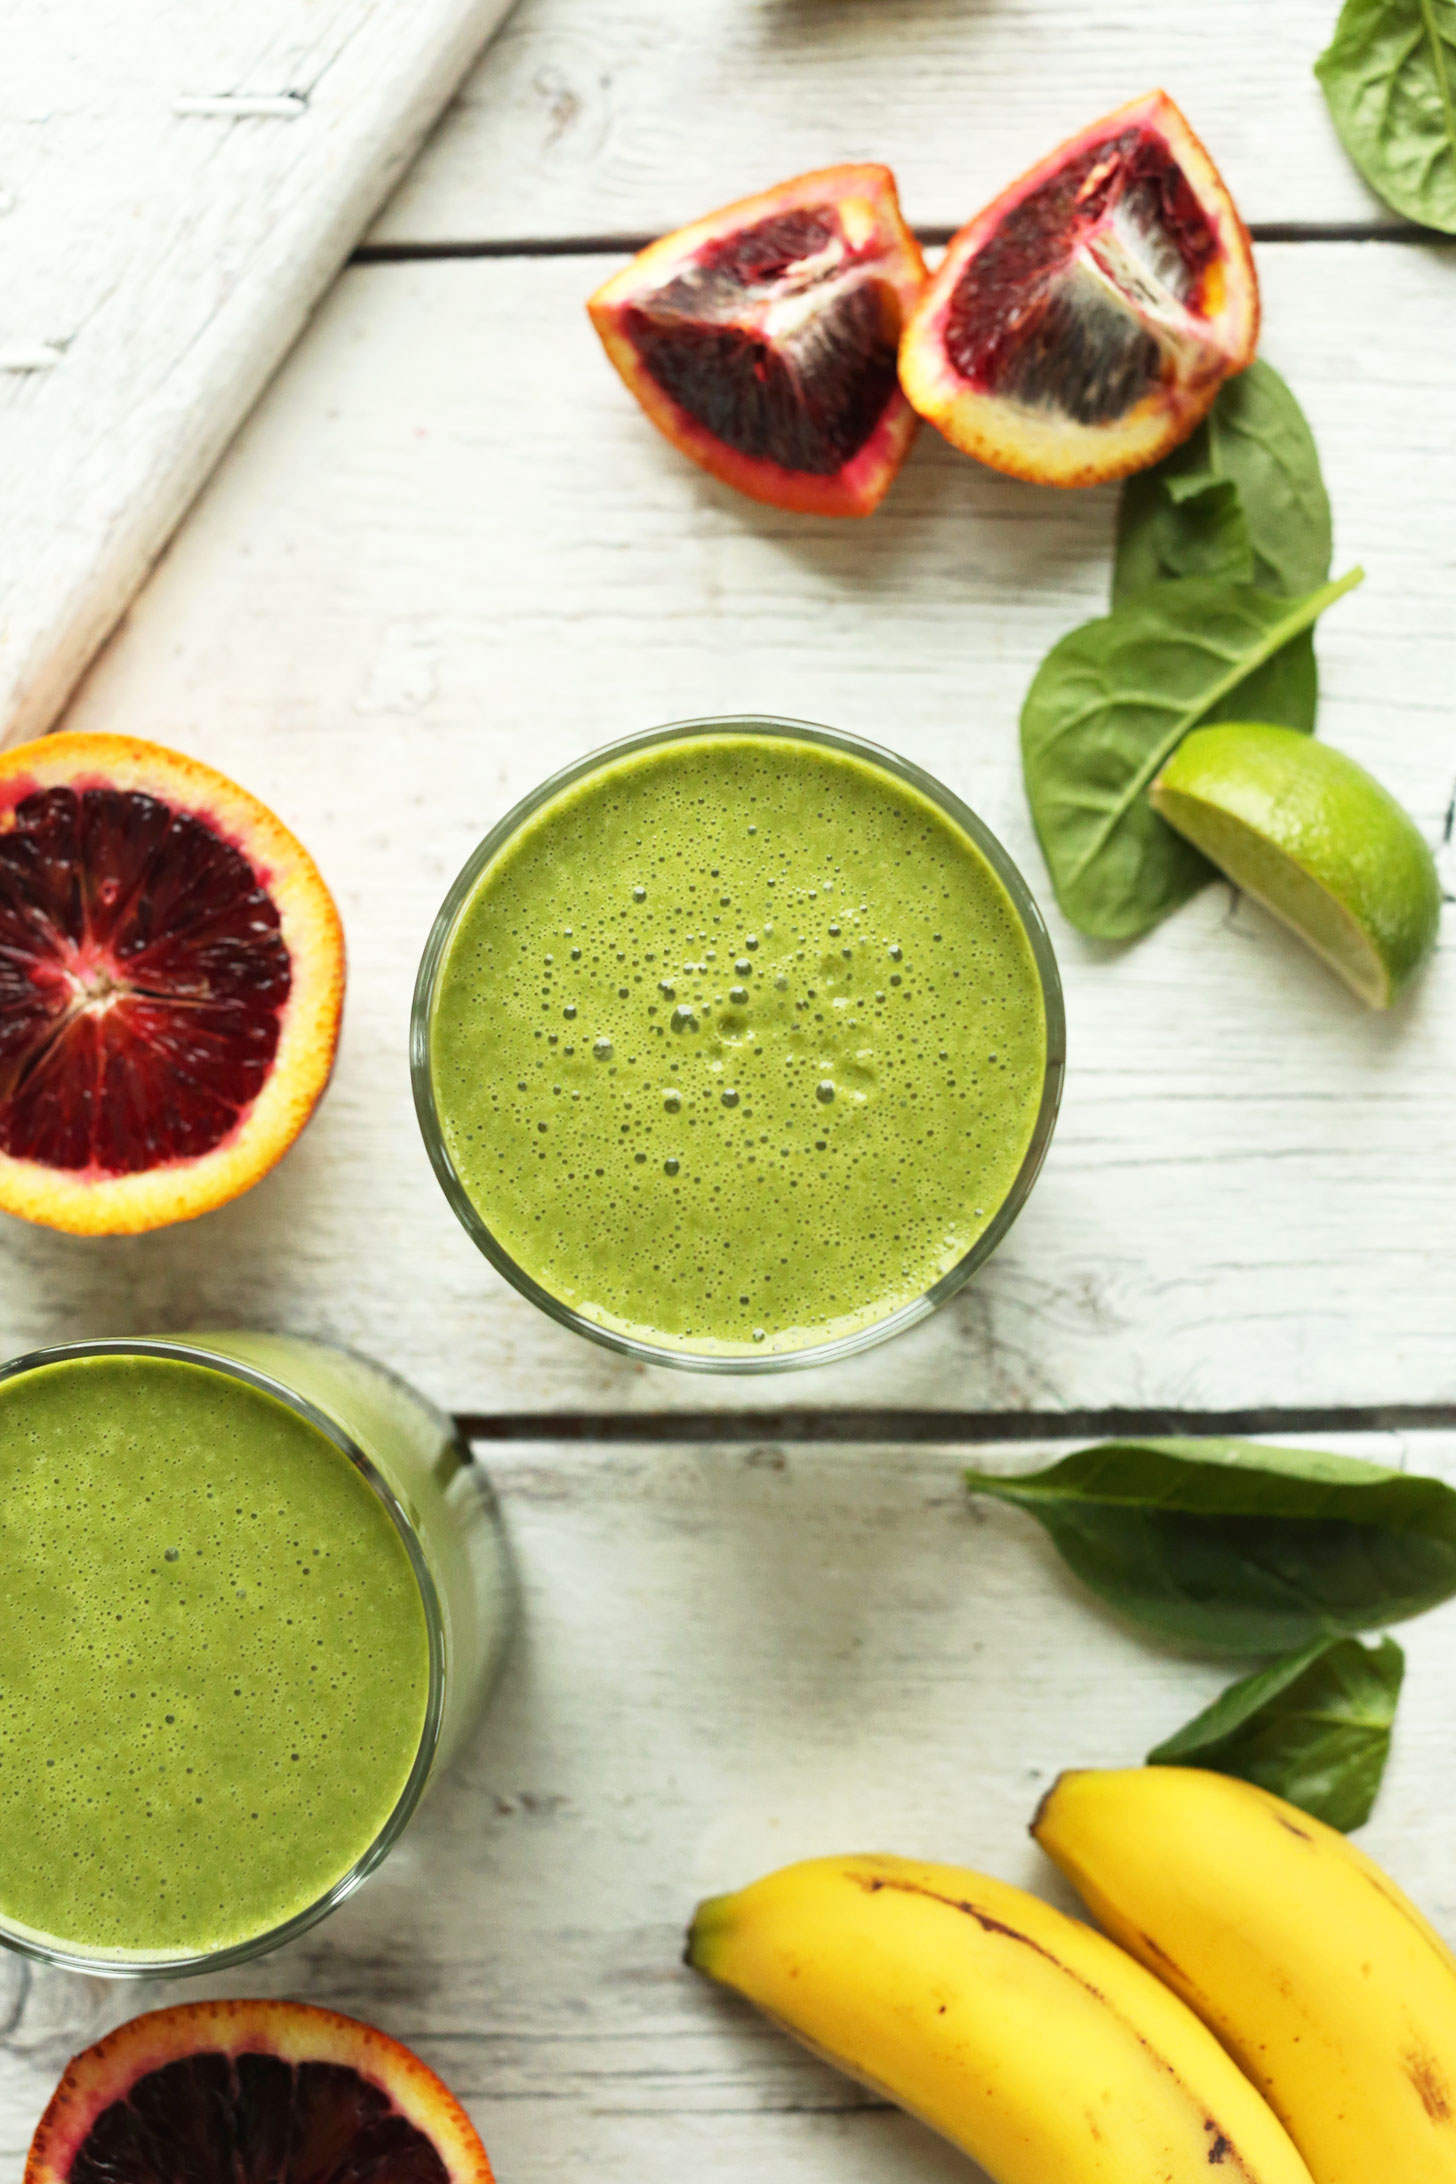 Glasses of our vegan Blood Orange Green Smoothie surrounded by key ingredients such as banana, blood orange, and spinach